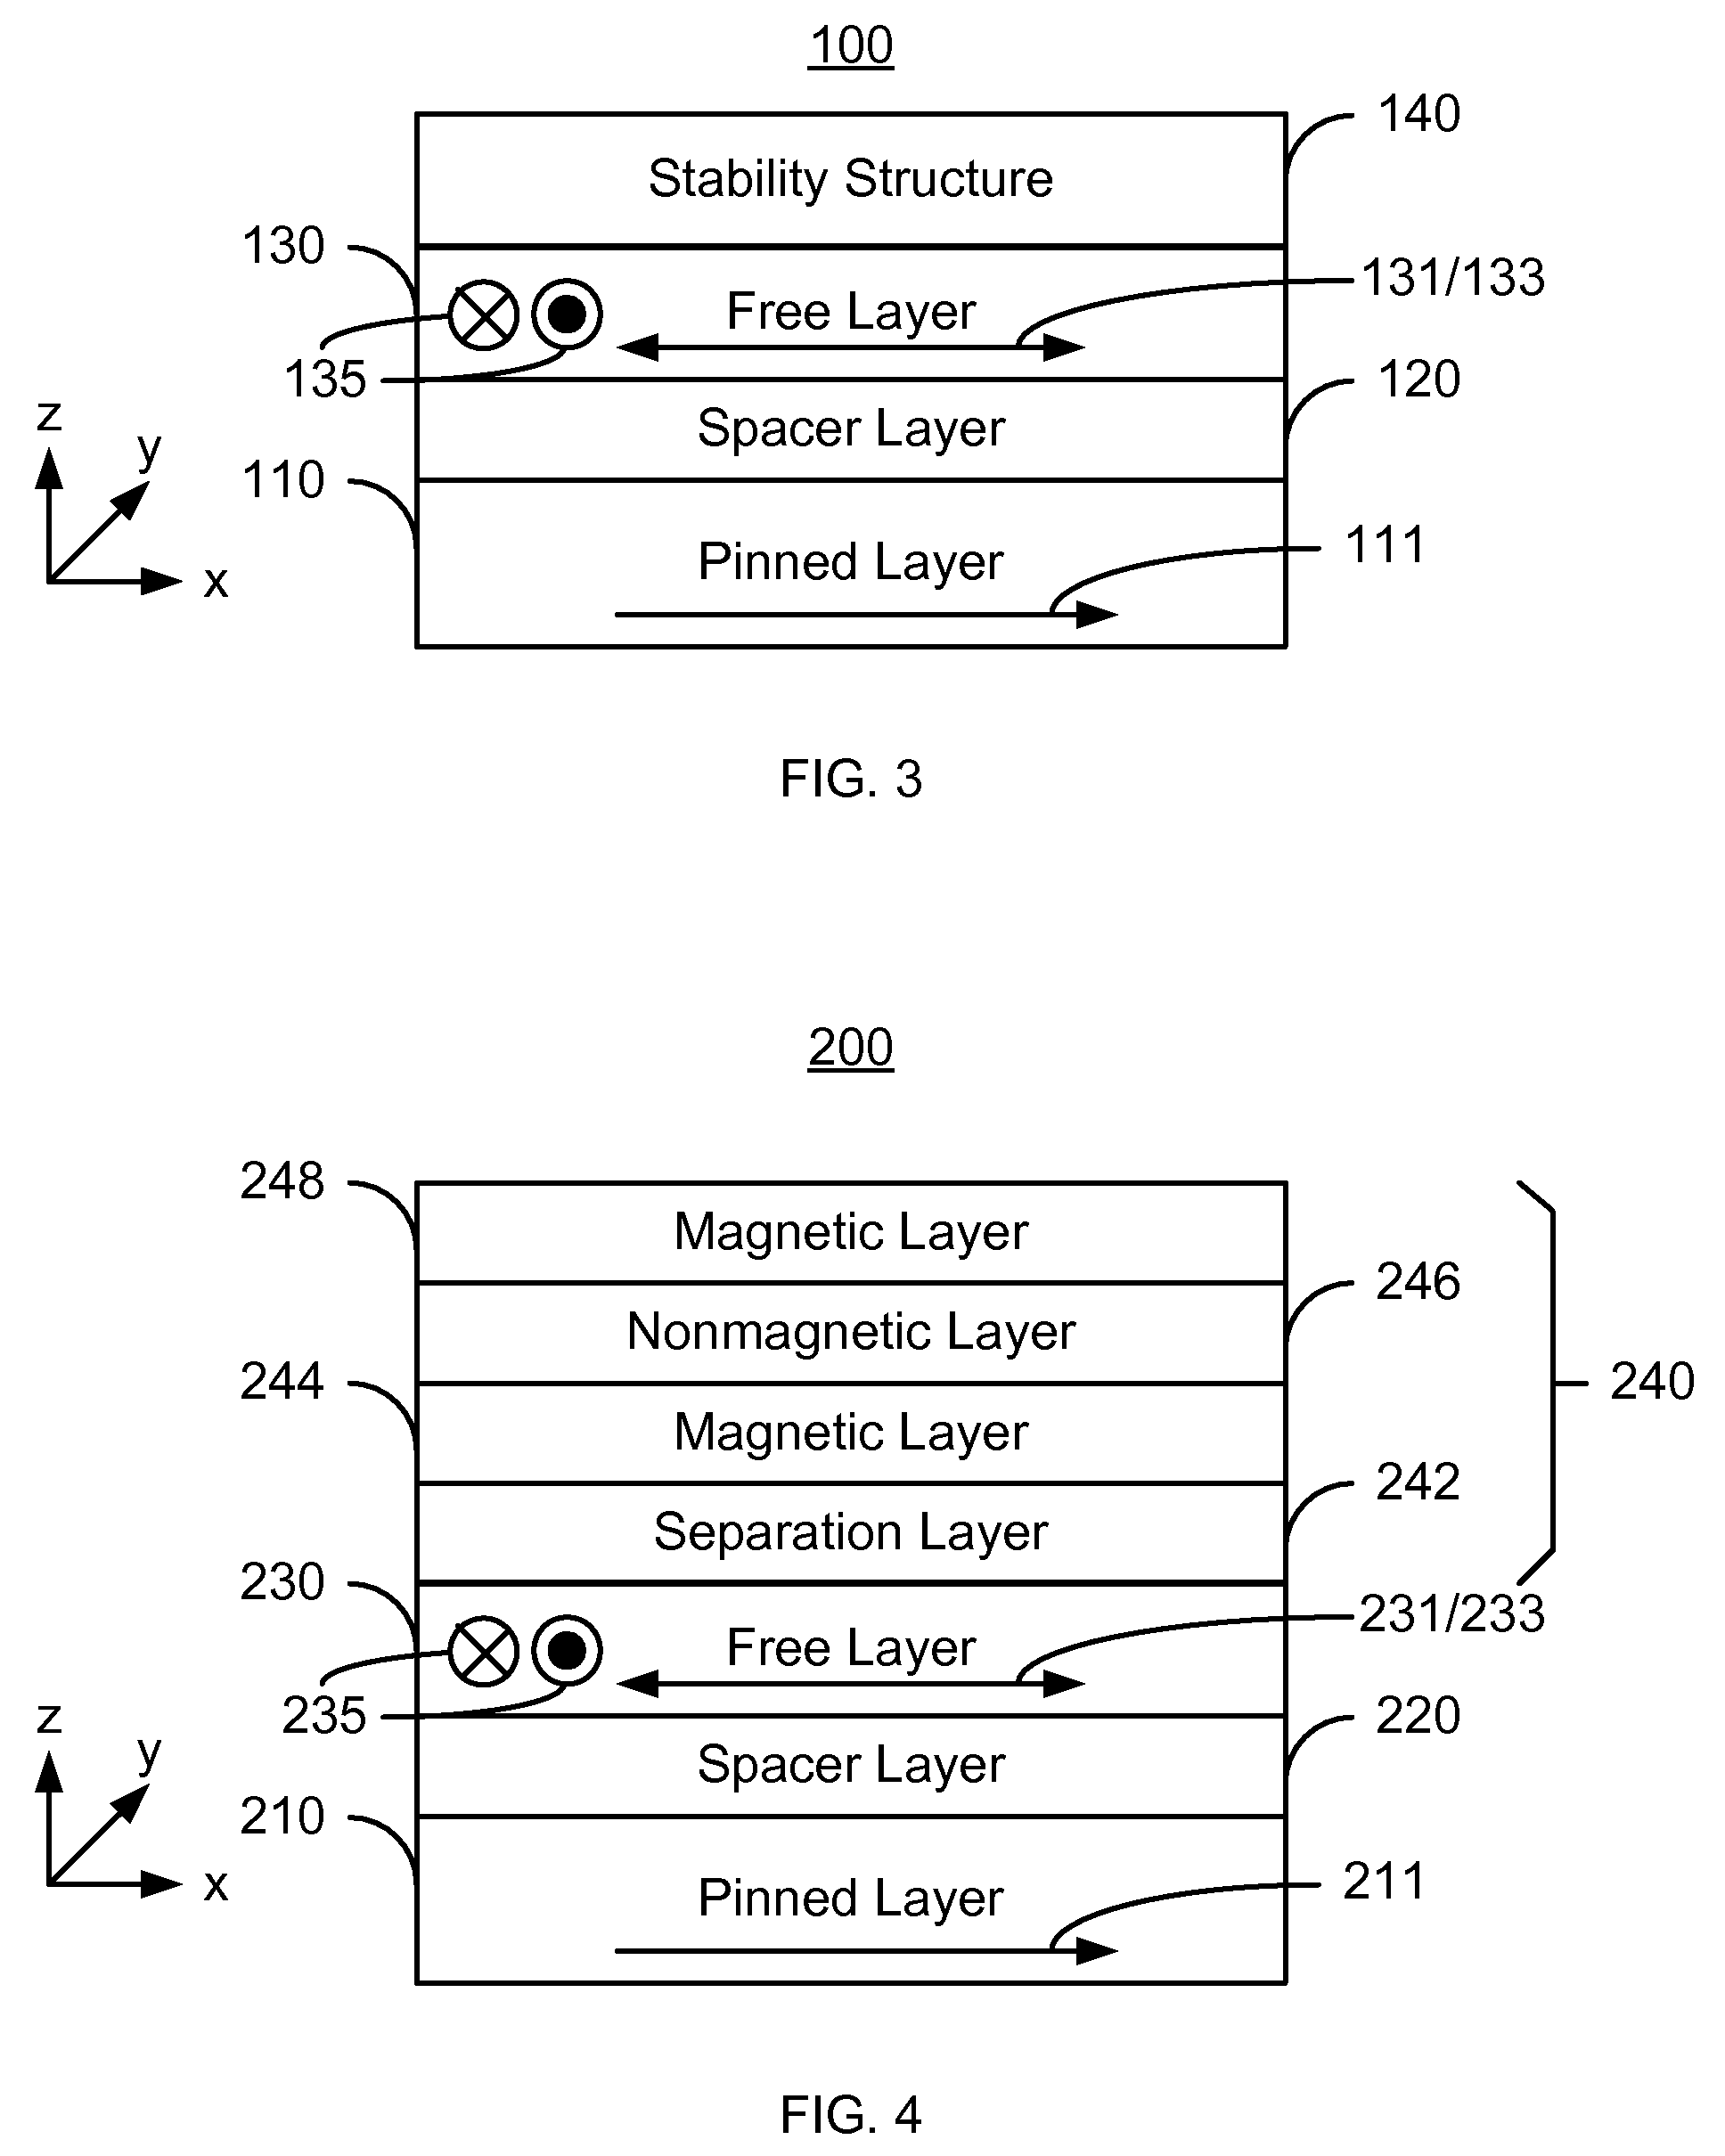 Method and system for providing magnetic elements having enhanced magnetic anisotropy and memories using such magnetic elements